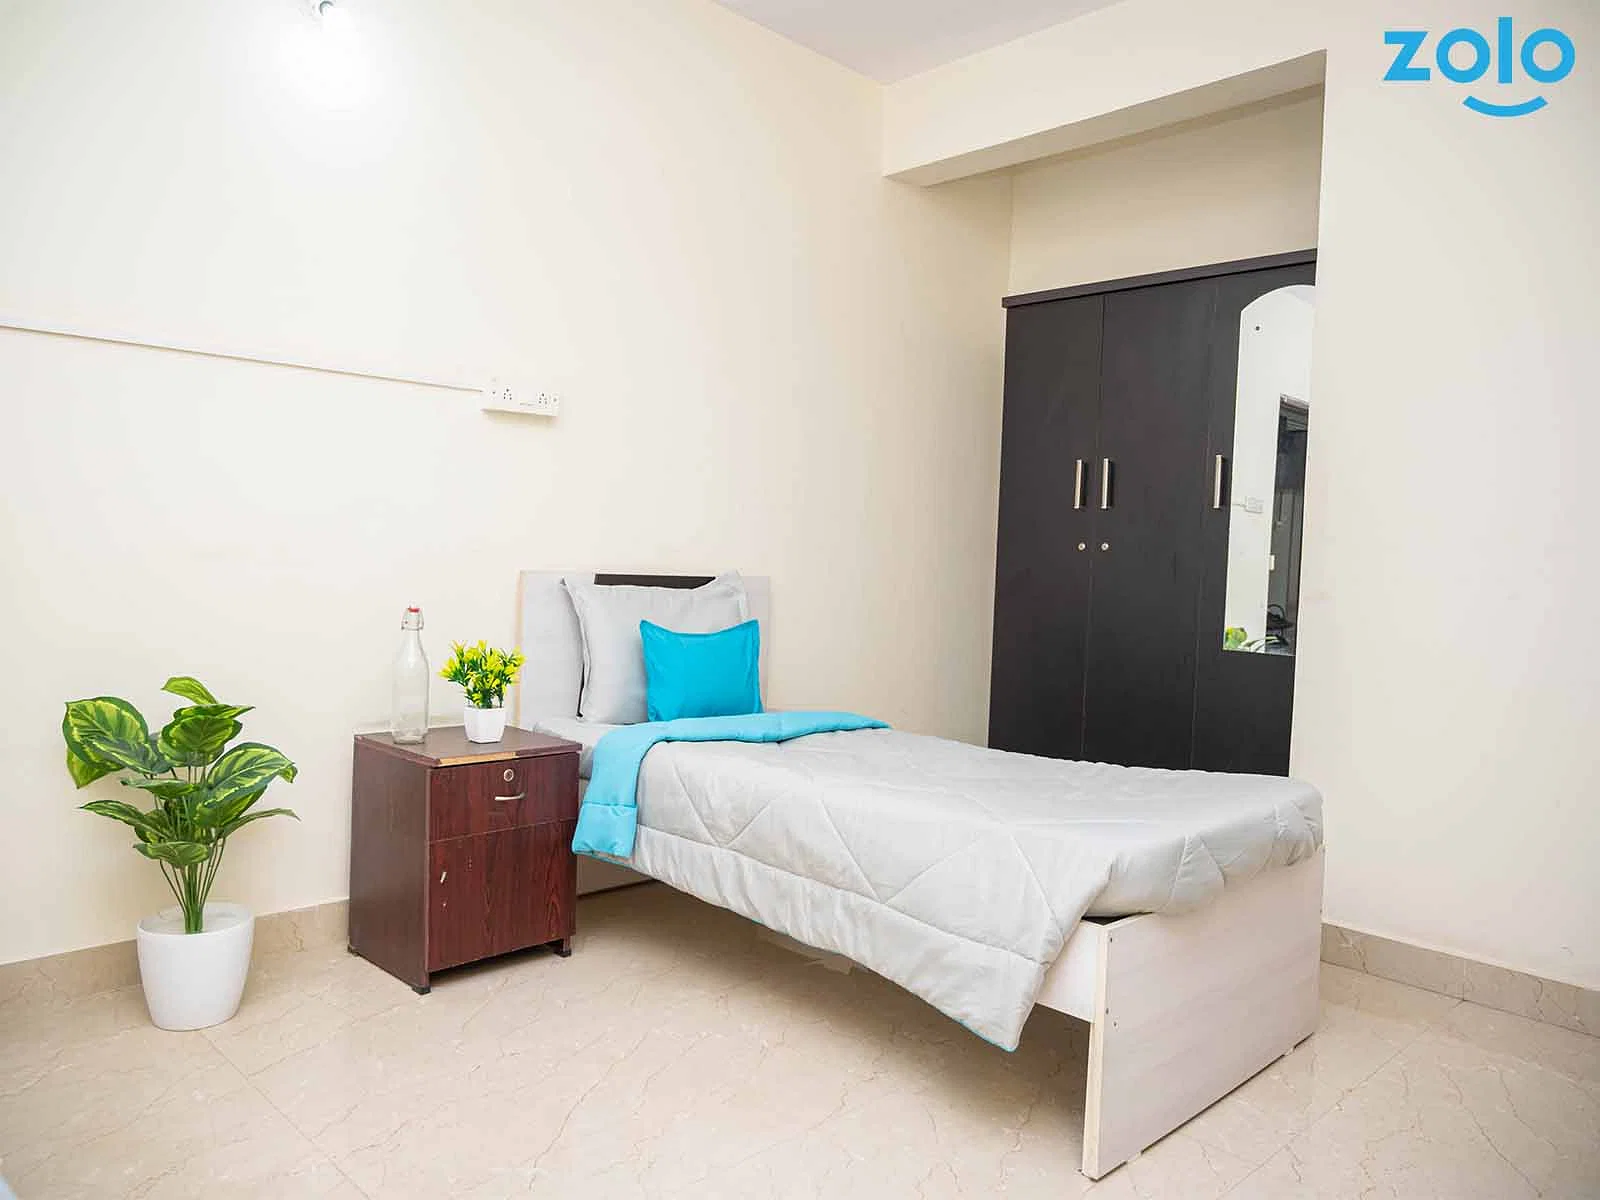 pgs in Thanisandra with Daily housekeeping facilities and free Wi-Fi-Zolo Clapton